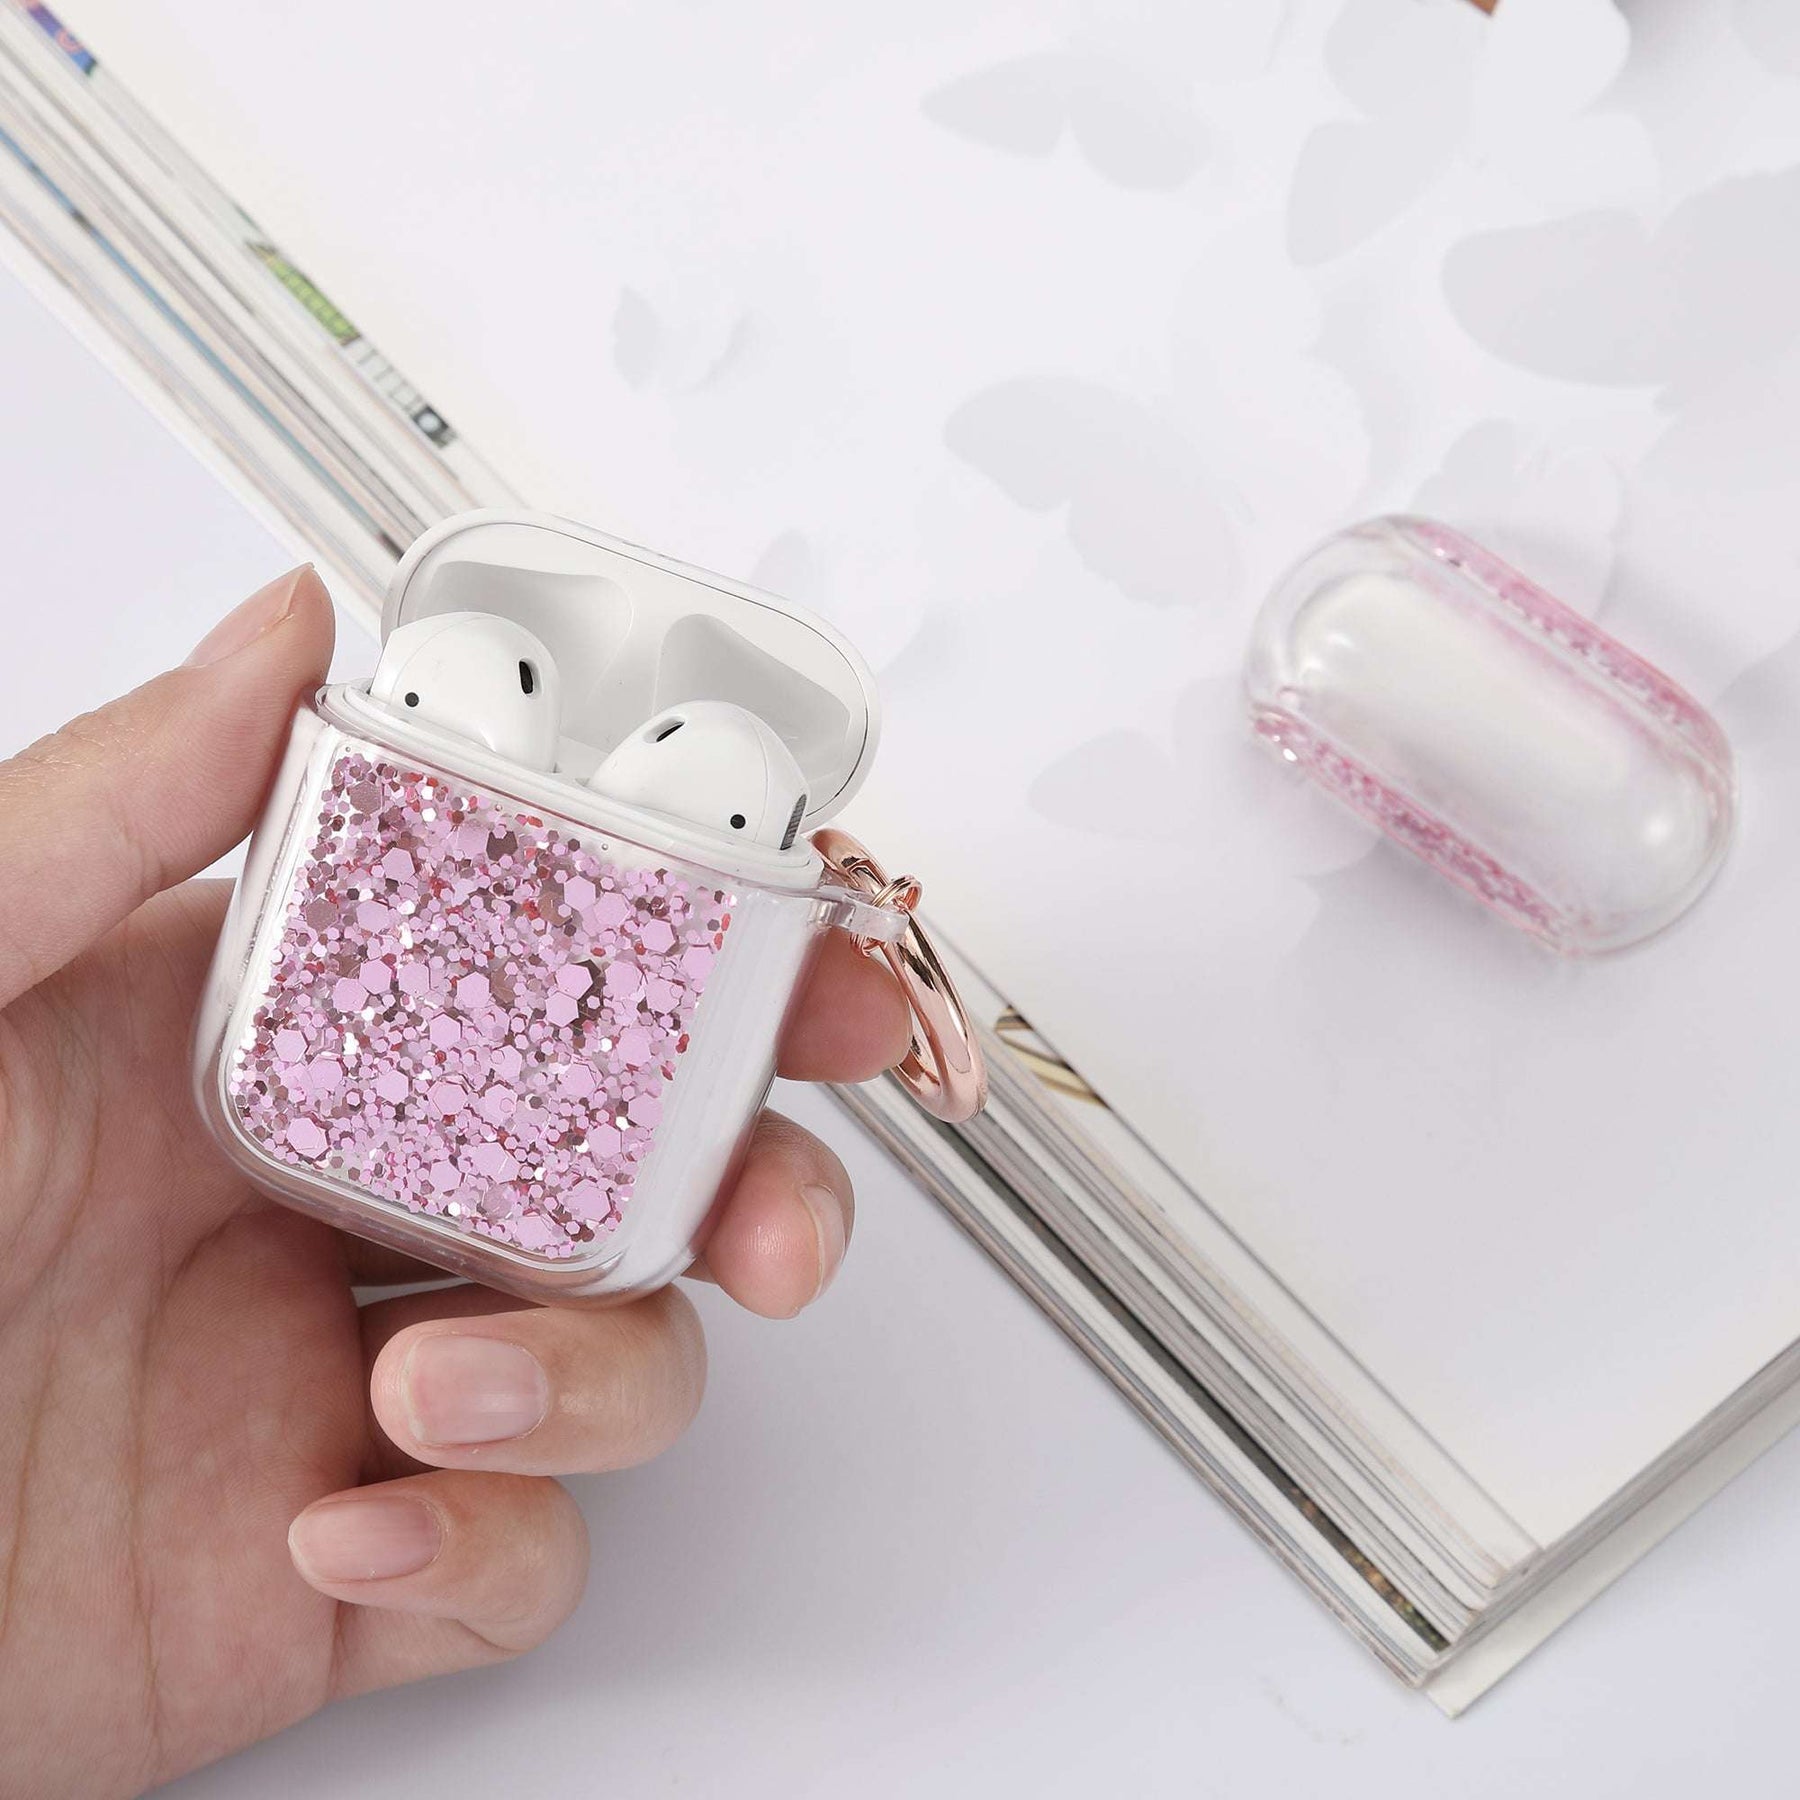 ULAK Glitter Case for AirPods 1 & 2, Stylish Design AirPods Case Cover for  Women Girls, Luxury Bling…See more ULAK Glitter Case for AirPods 1 & 2